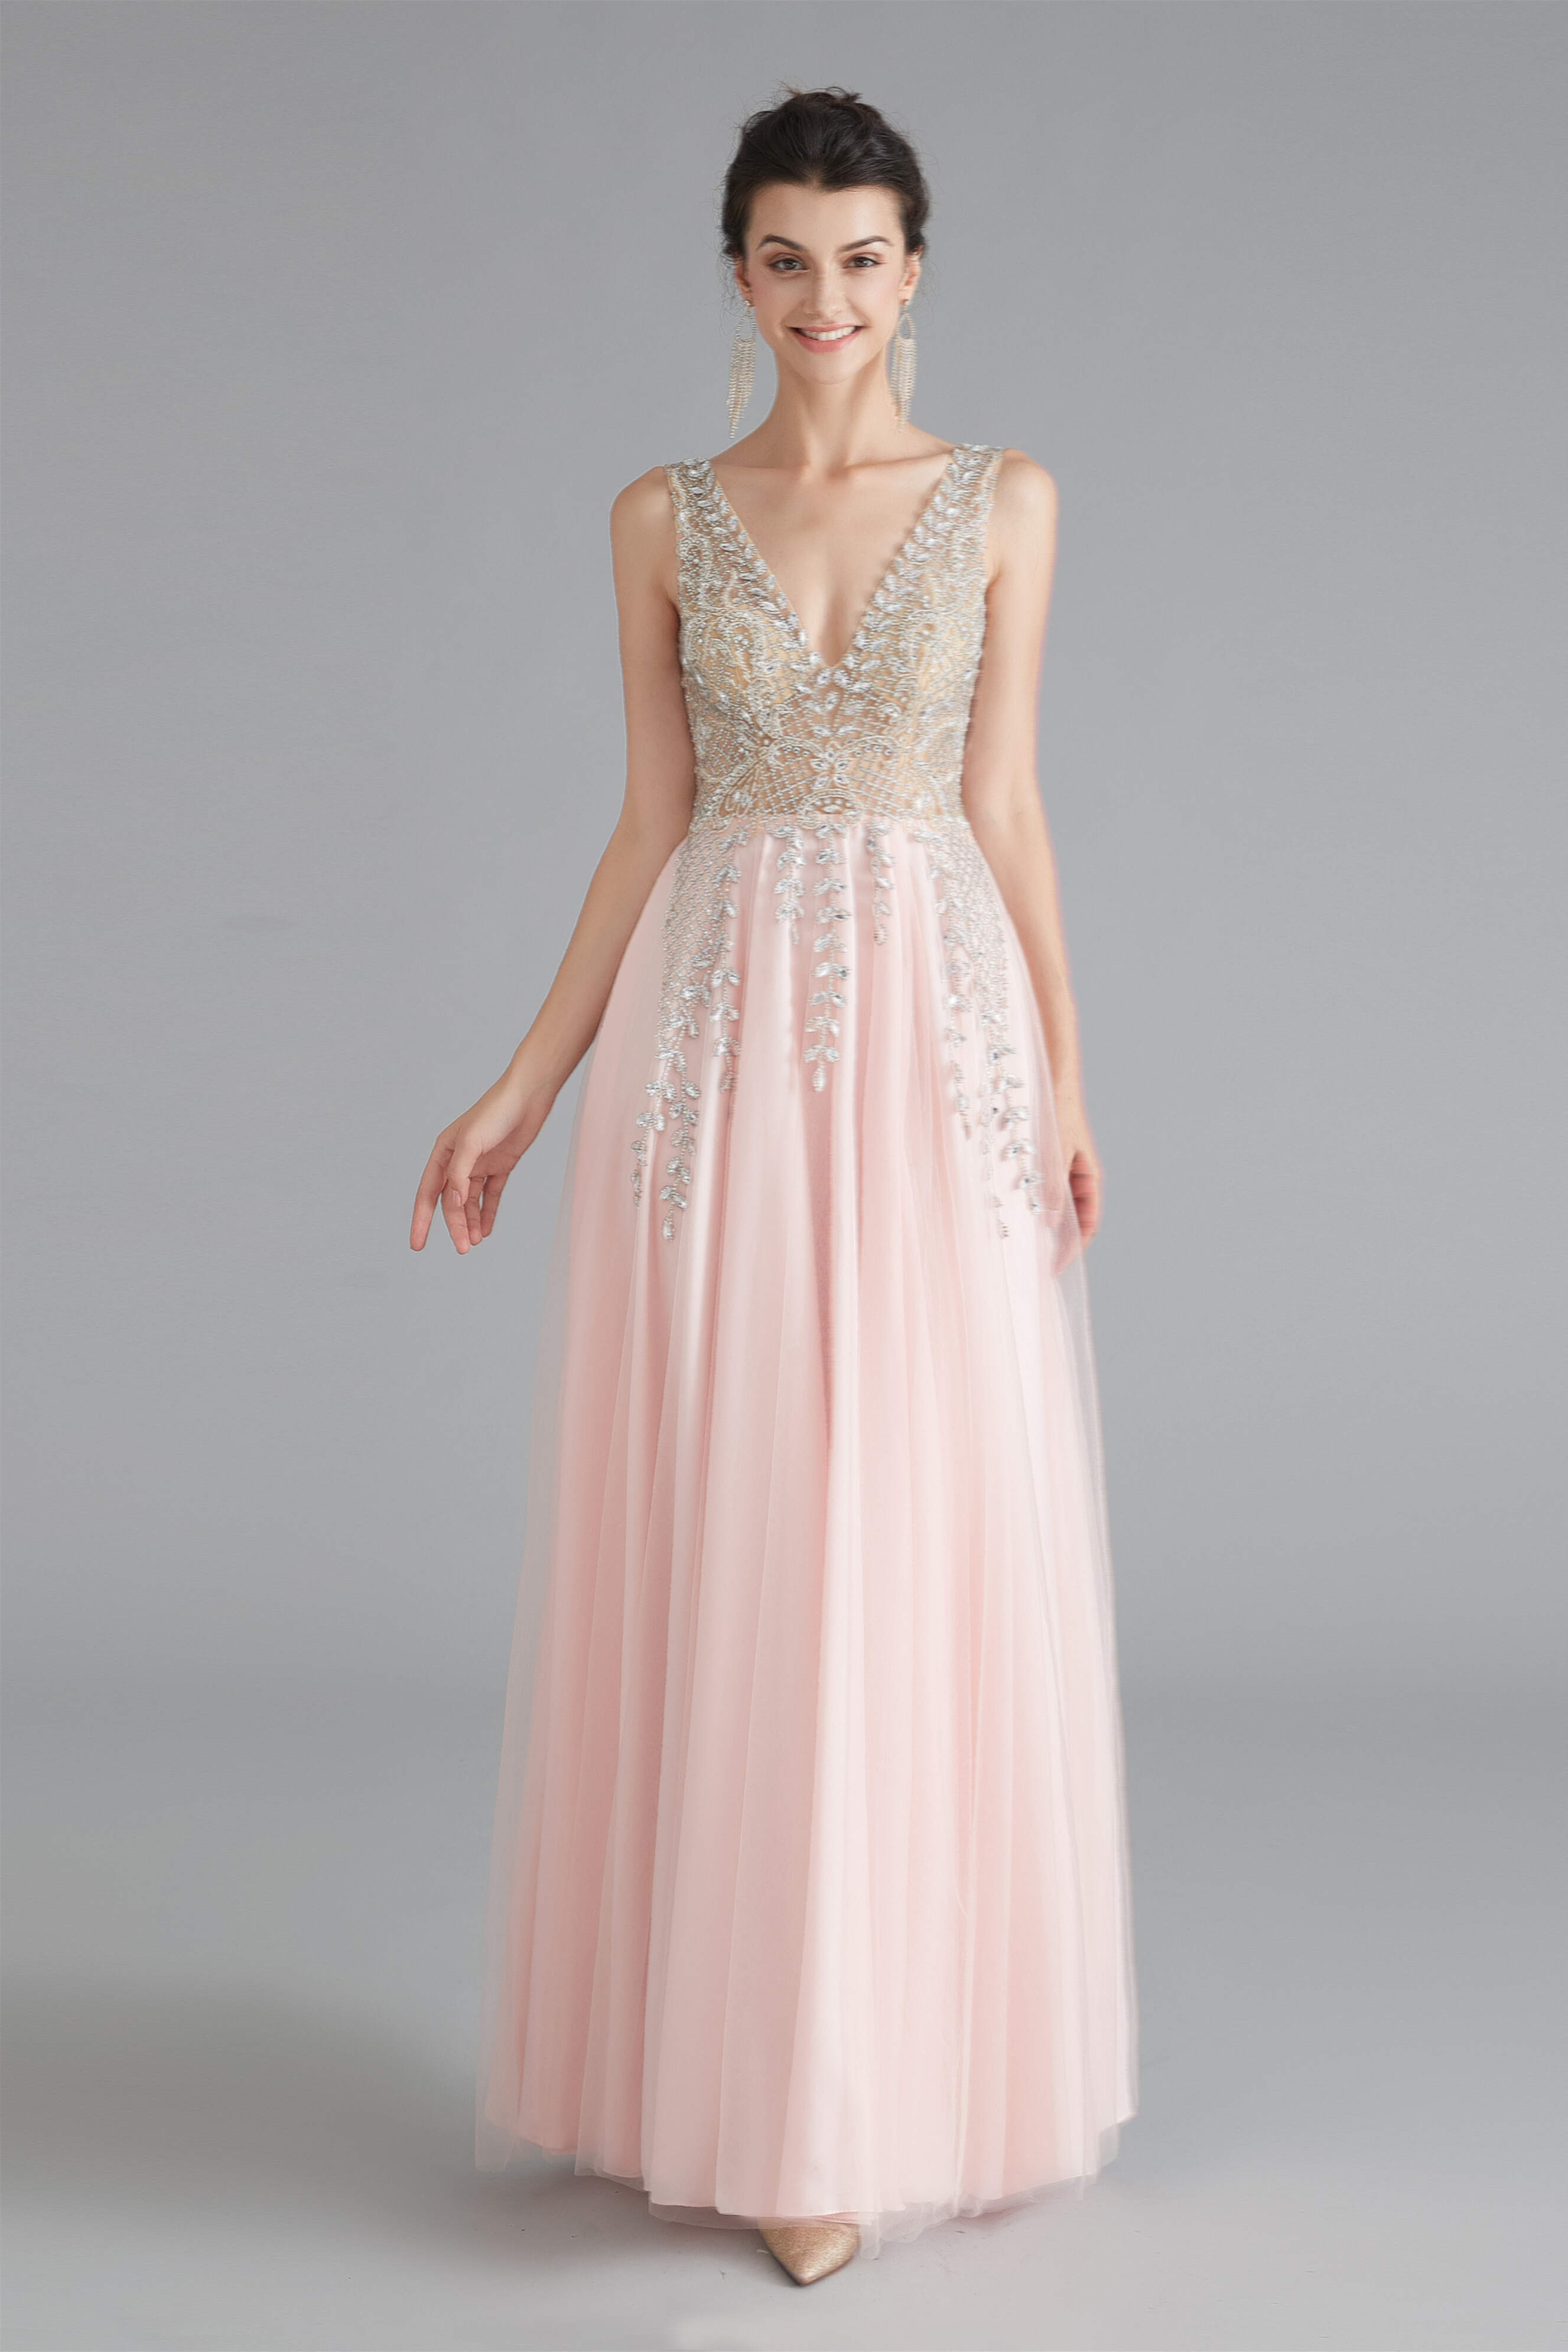 A Line Crystal Pink Split V Neck Backless Beaded Corset Prom Dresses outfit, Homecoming Dresses